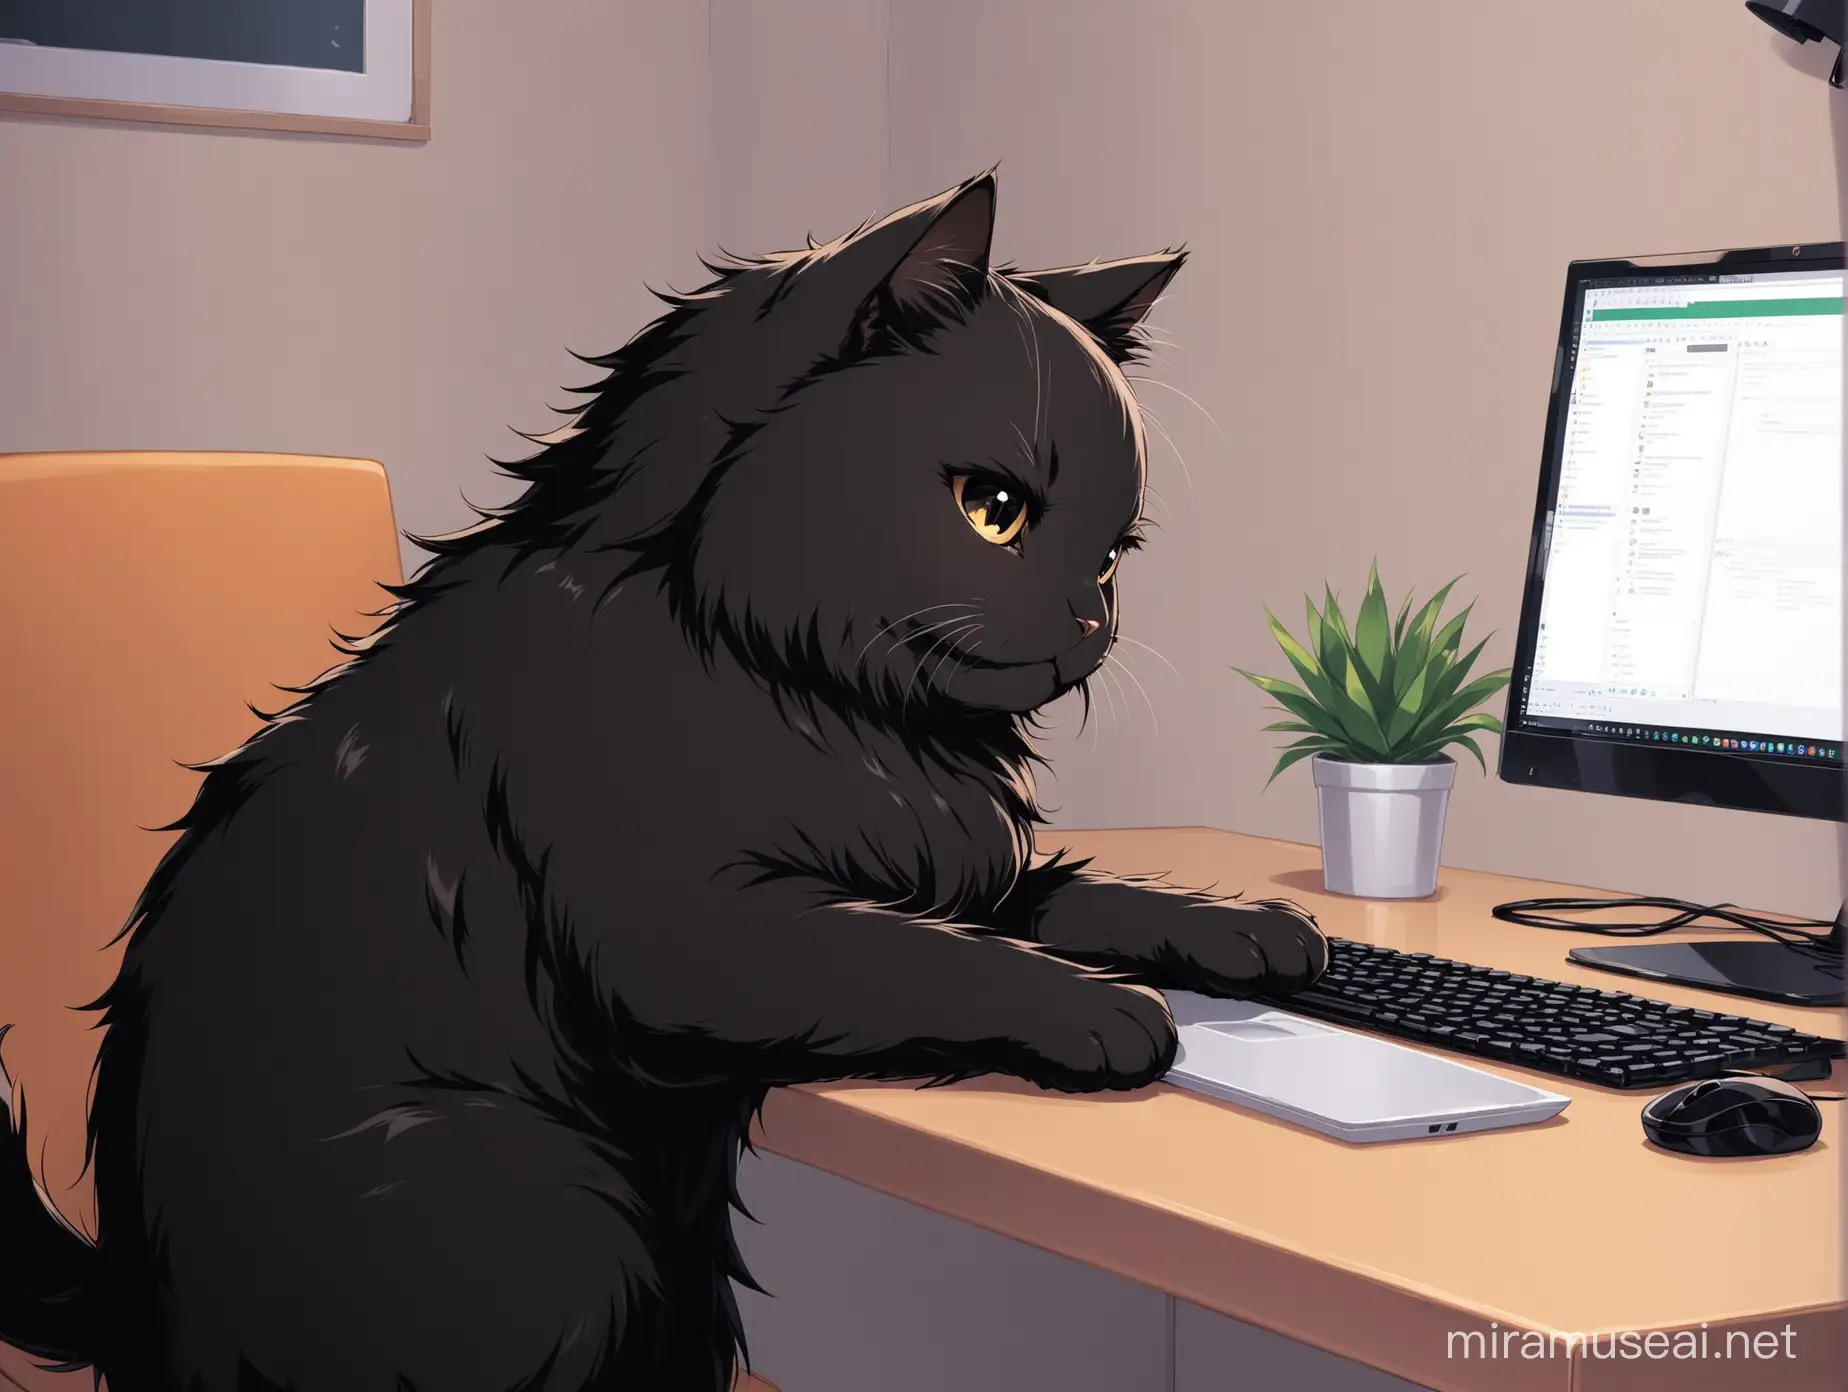 Adorable Black Cat Working on Computer in Cozy Room